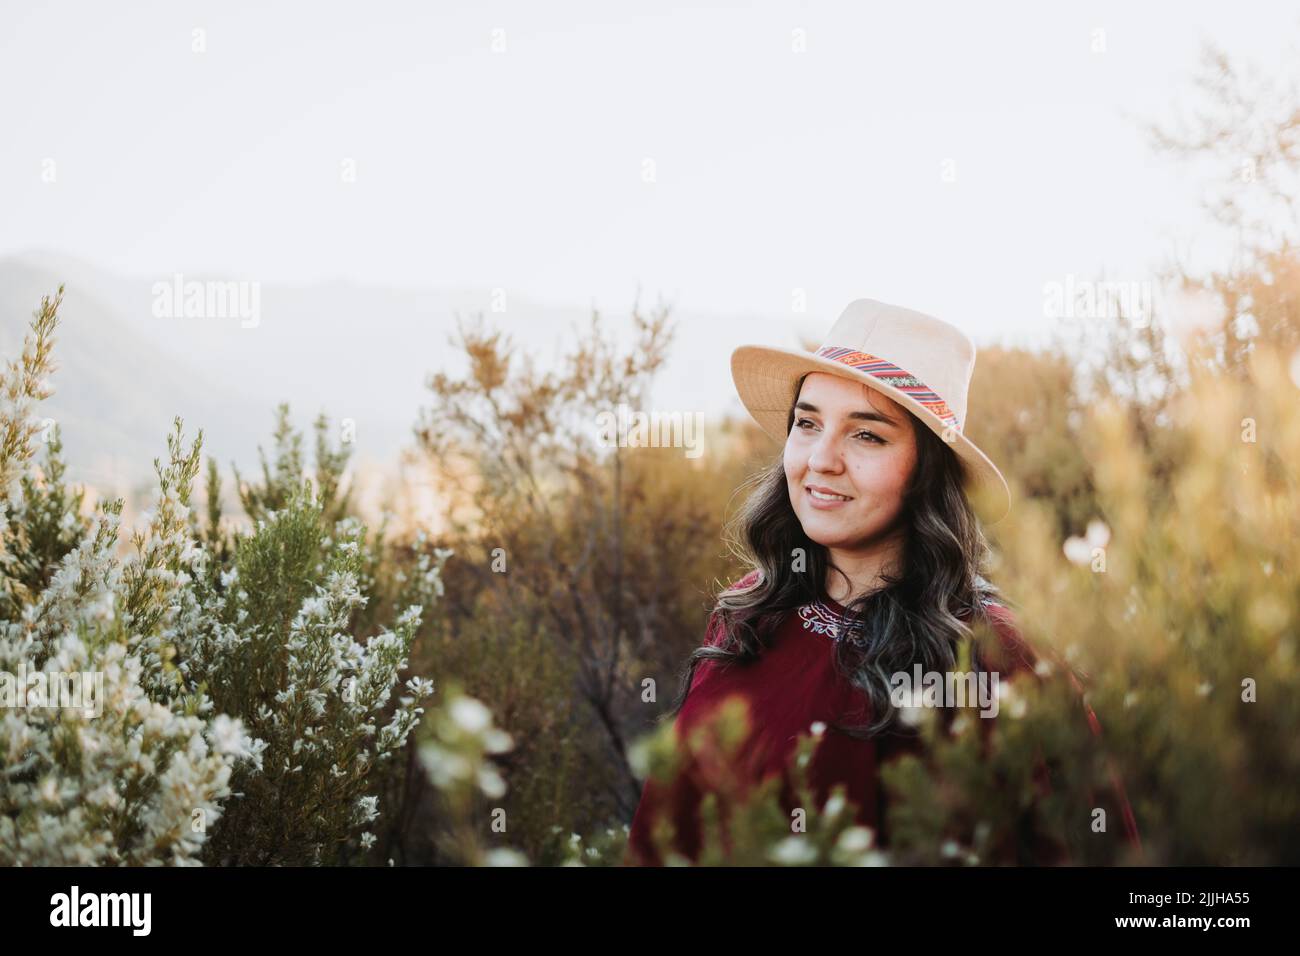 Smiling latin backpacker woman wearing a traditional red poncho and a hat in a leafy natural space at sunset Stock Photo